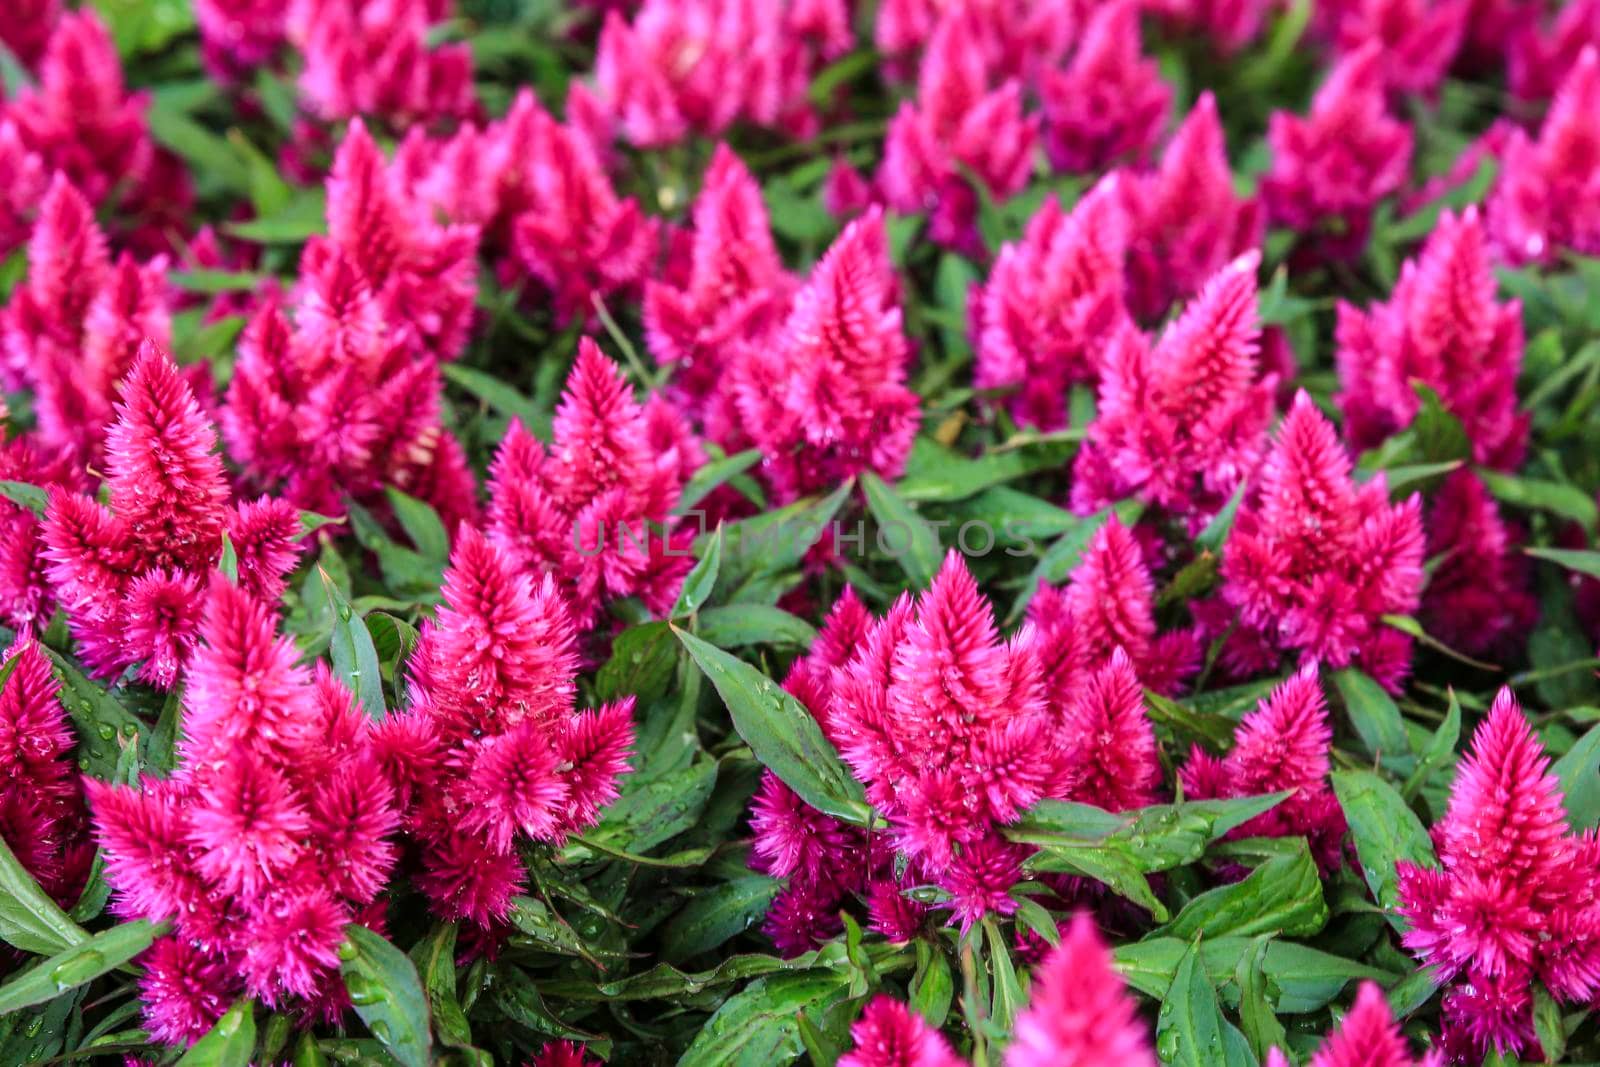 Colorful and beautiful Celosia Argentea plants in the garden